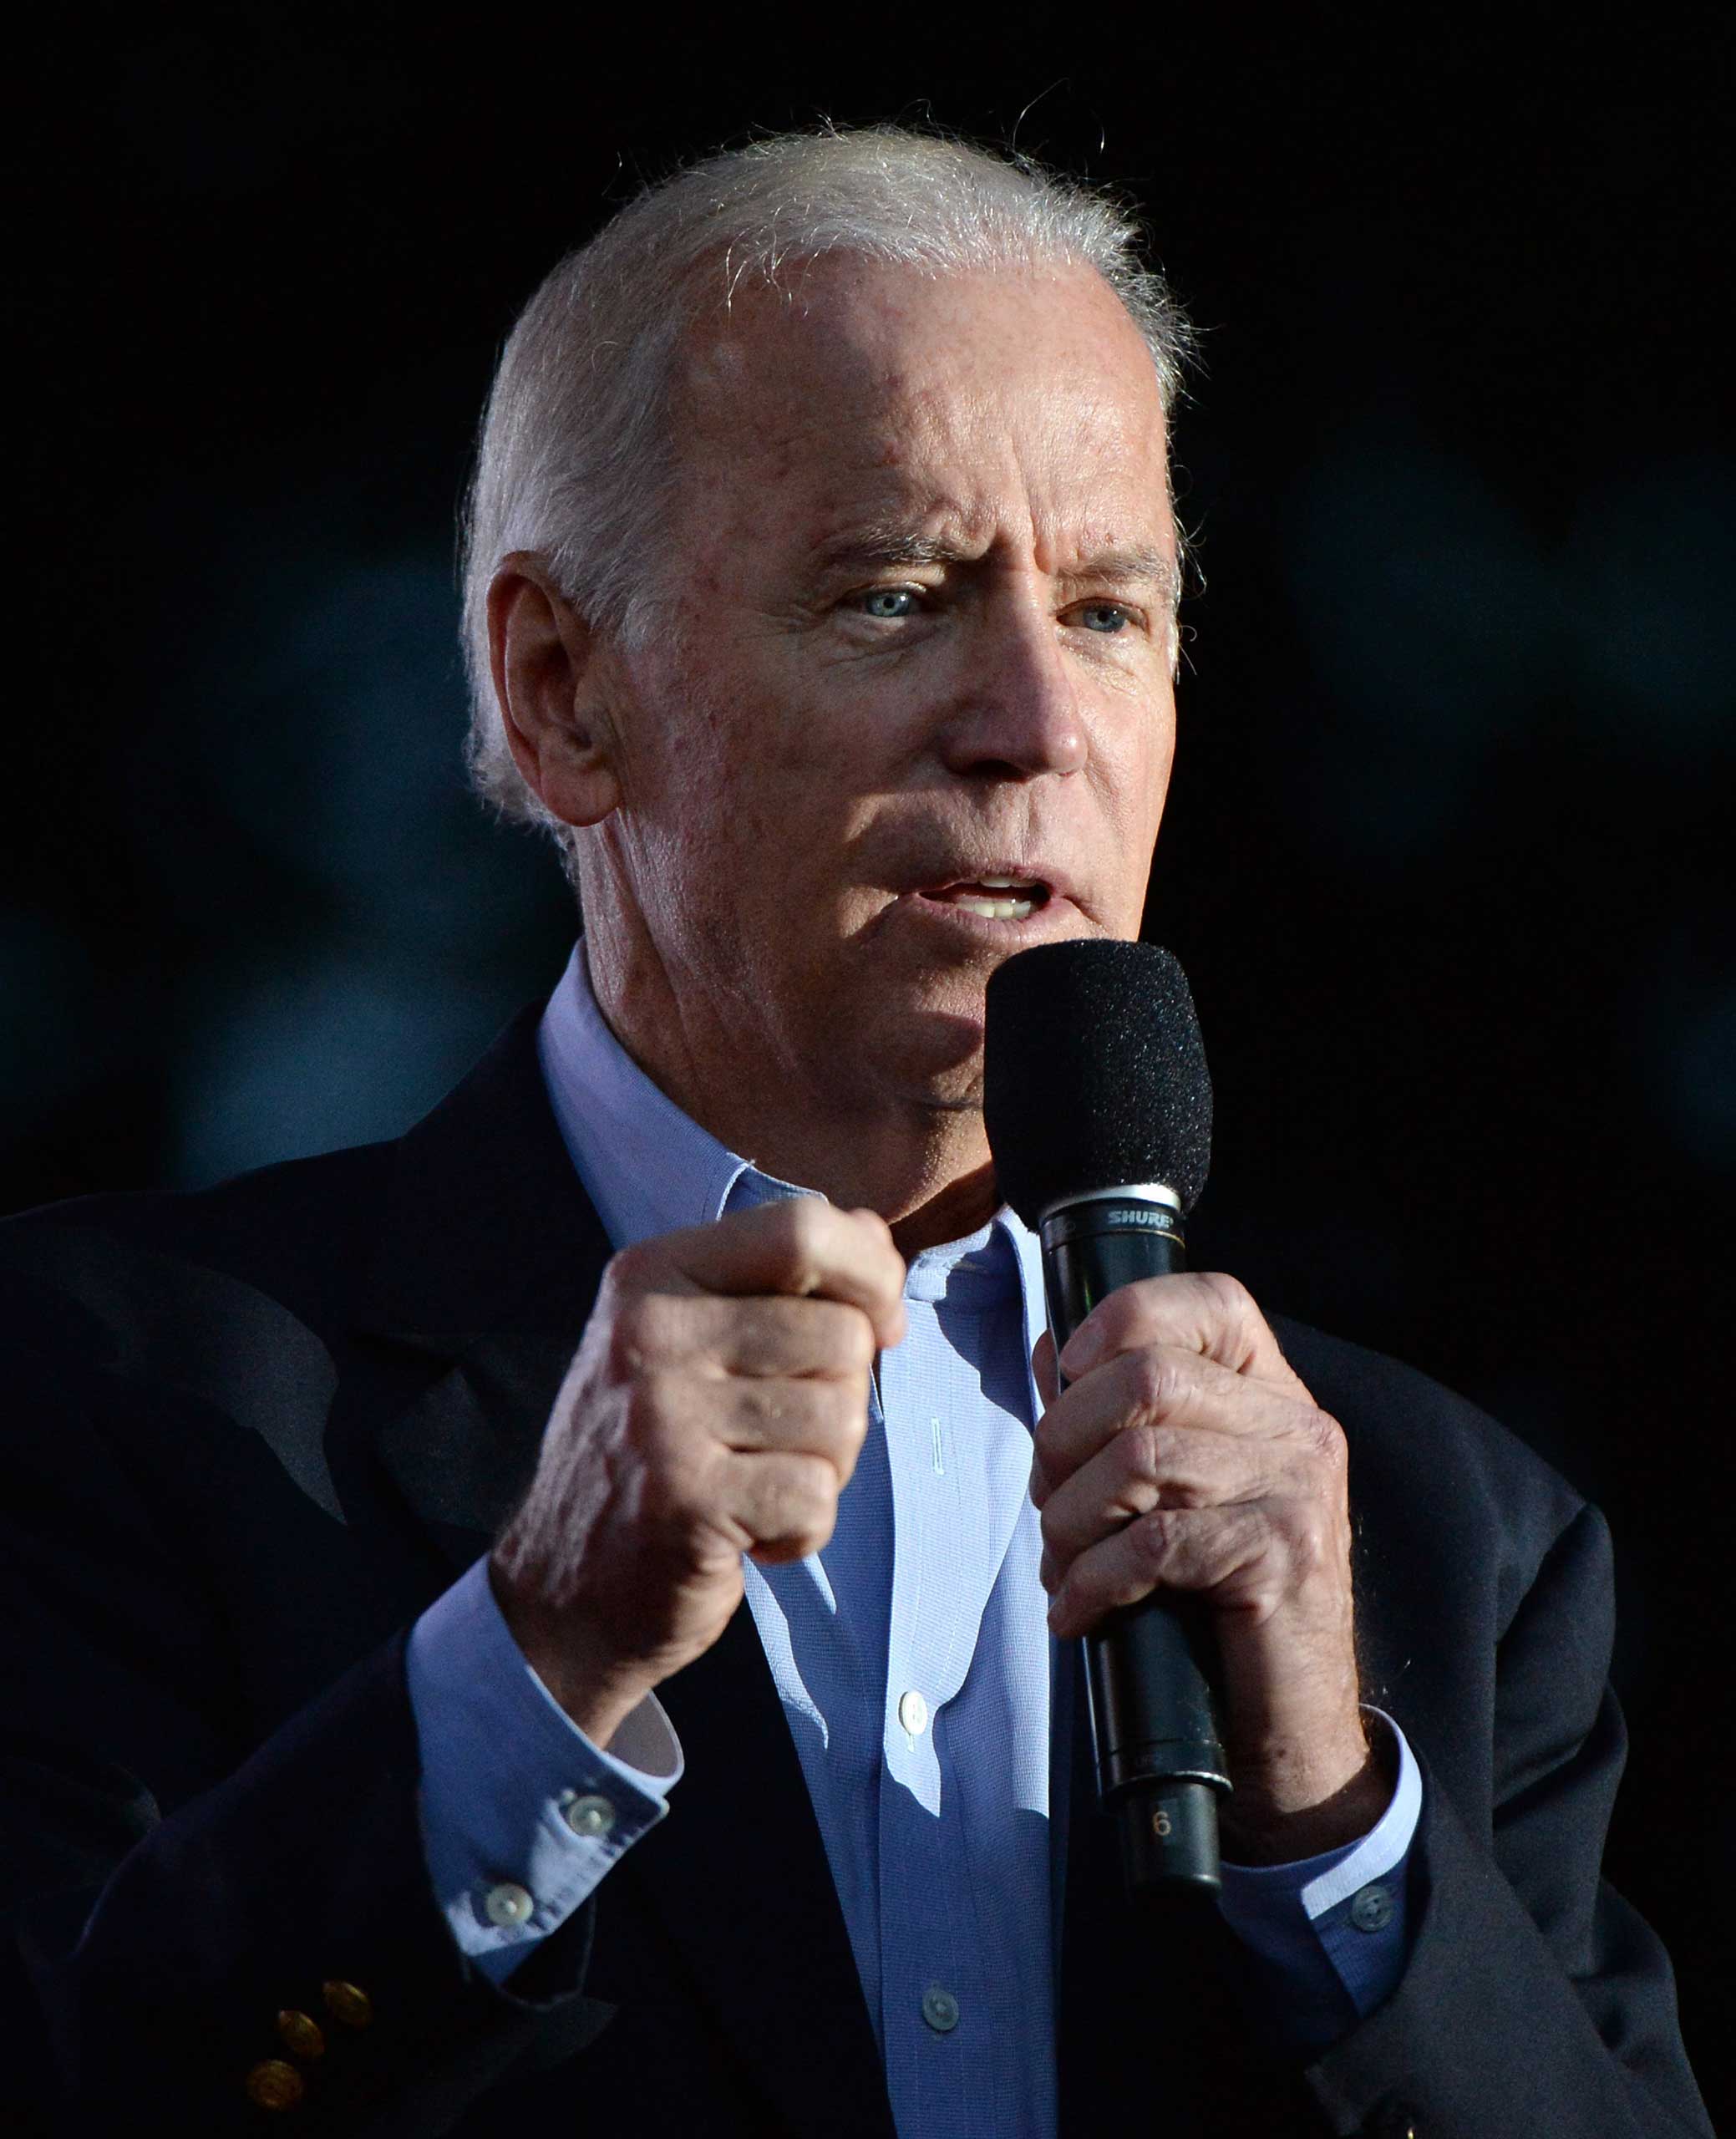 Vice President of the United States Joe Biden attends 2015 Global Citizen Festival to end extreme poverty by 2030 in Central Park in New York City, on Sept. 26, 2015. (Michael Kovac—FilmMagic)